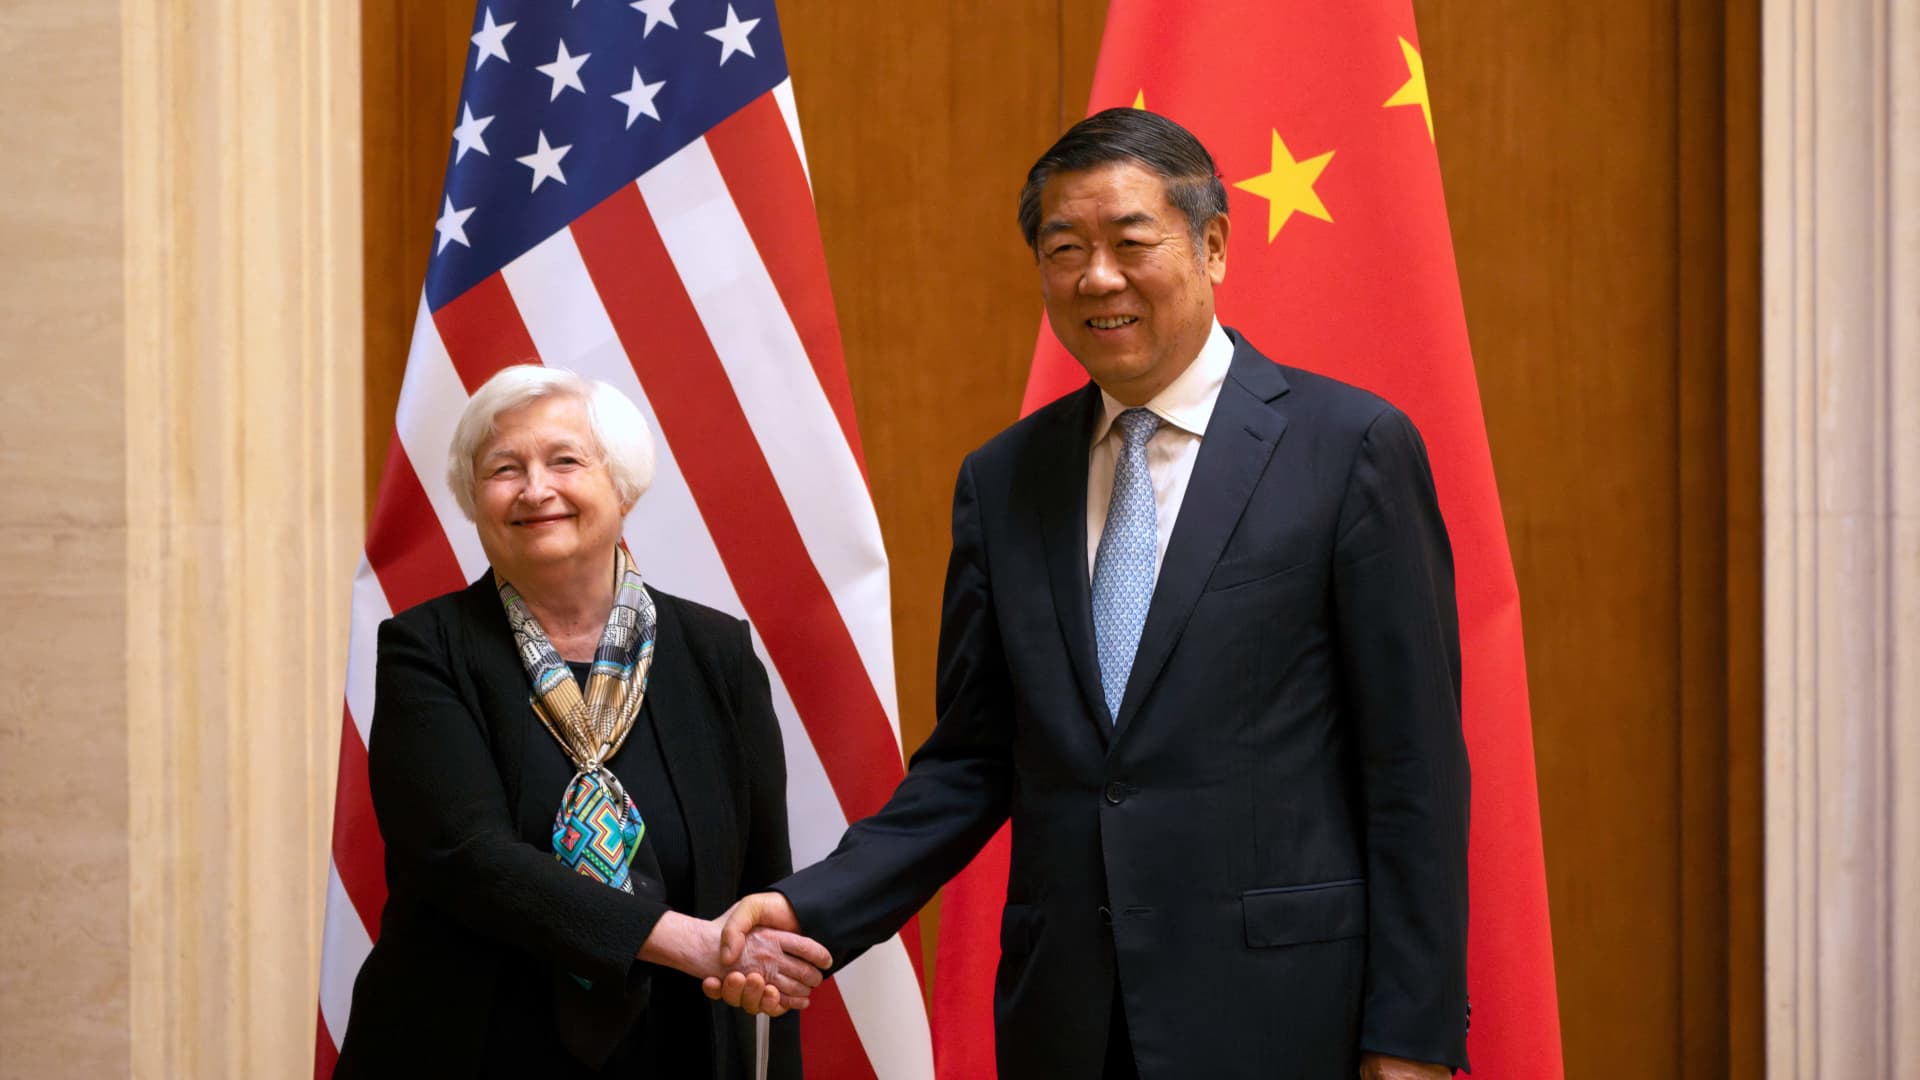 Yellen to host China’s He Lifeng for ‘intensive diplomacy’ ahead of APEC